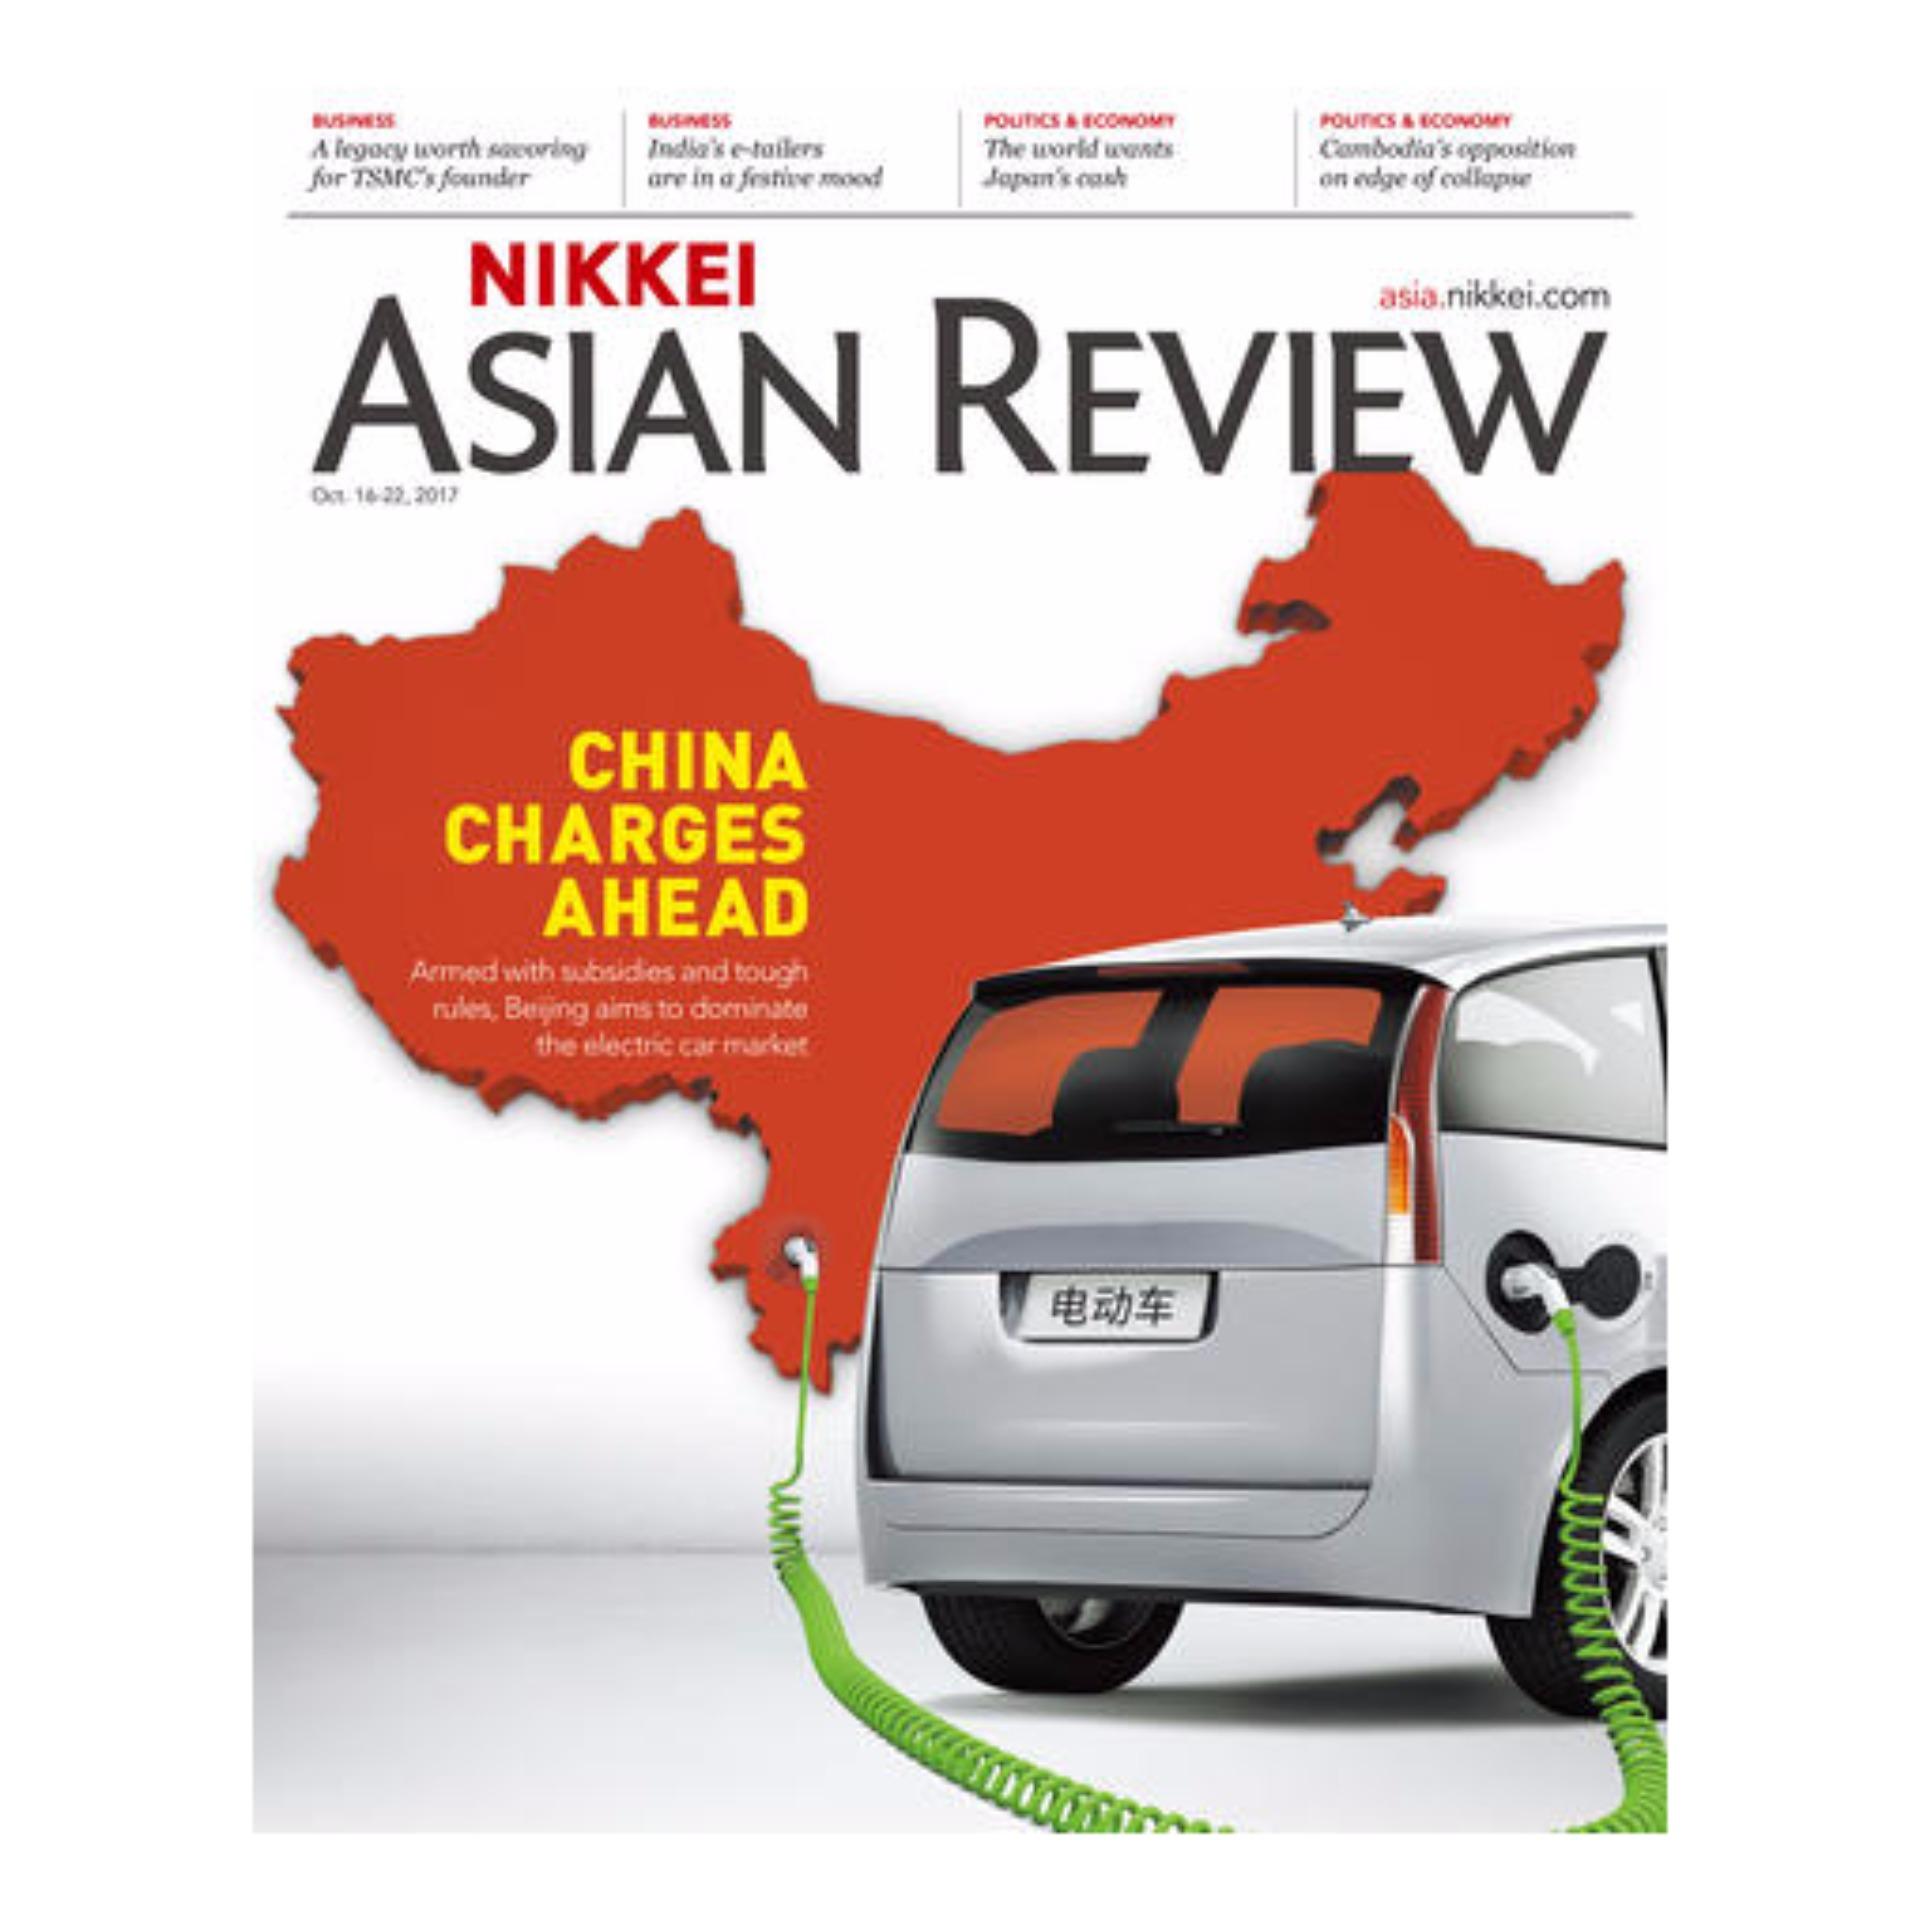 Nikkei Asian Review:CHINA CHARGES AHEAD